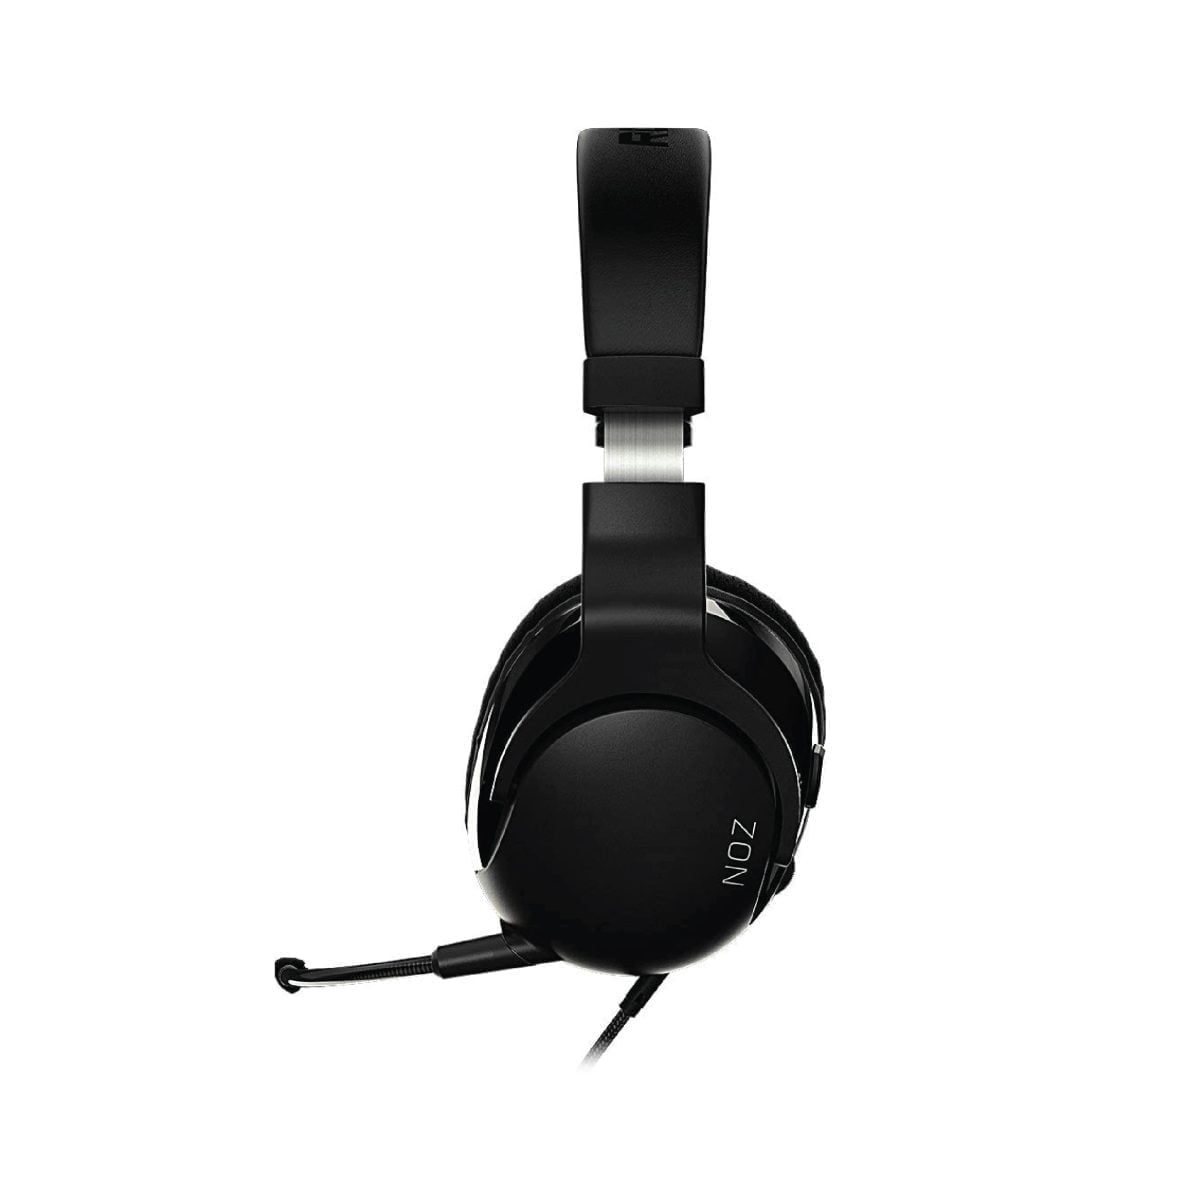 Headphones 25 Roccat &Lt;Div Id=&Quot;Main_Textcontent&Quot;&Gt; &Lt;Div Class=&Quot;Contentrow&Quot;&Gt; &Lt;P Class=&Quot;Copytext&Quot;&Gt;The Noz Features Rich, Natural-Sounding Stereo Audio And Superior Comfort. At Only 210 Grams It Is Ultralight And Boasts Innovations Such As A Fabric That Keeps Cool During Wear And Earcups With Extra Space For Better Acoustics.&Lt;/P&Gt; &Lt;/Div&Gt; &Lt;/Div&Gt; Roccat Noz Stereo Gaming Headset